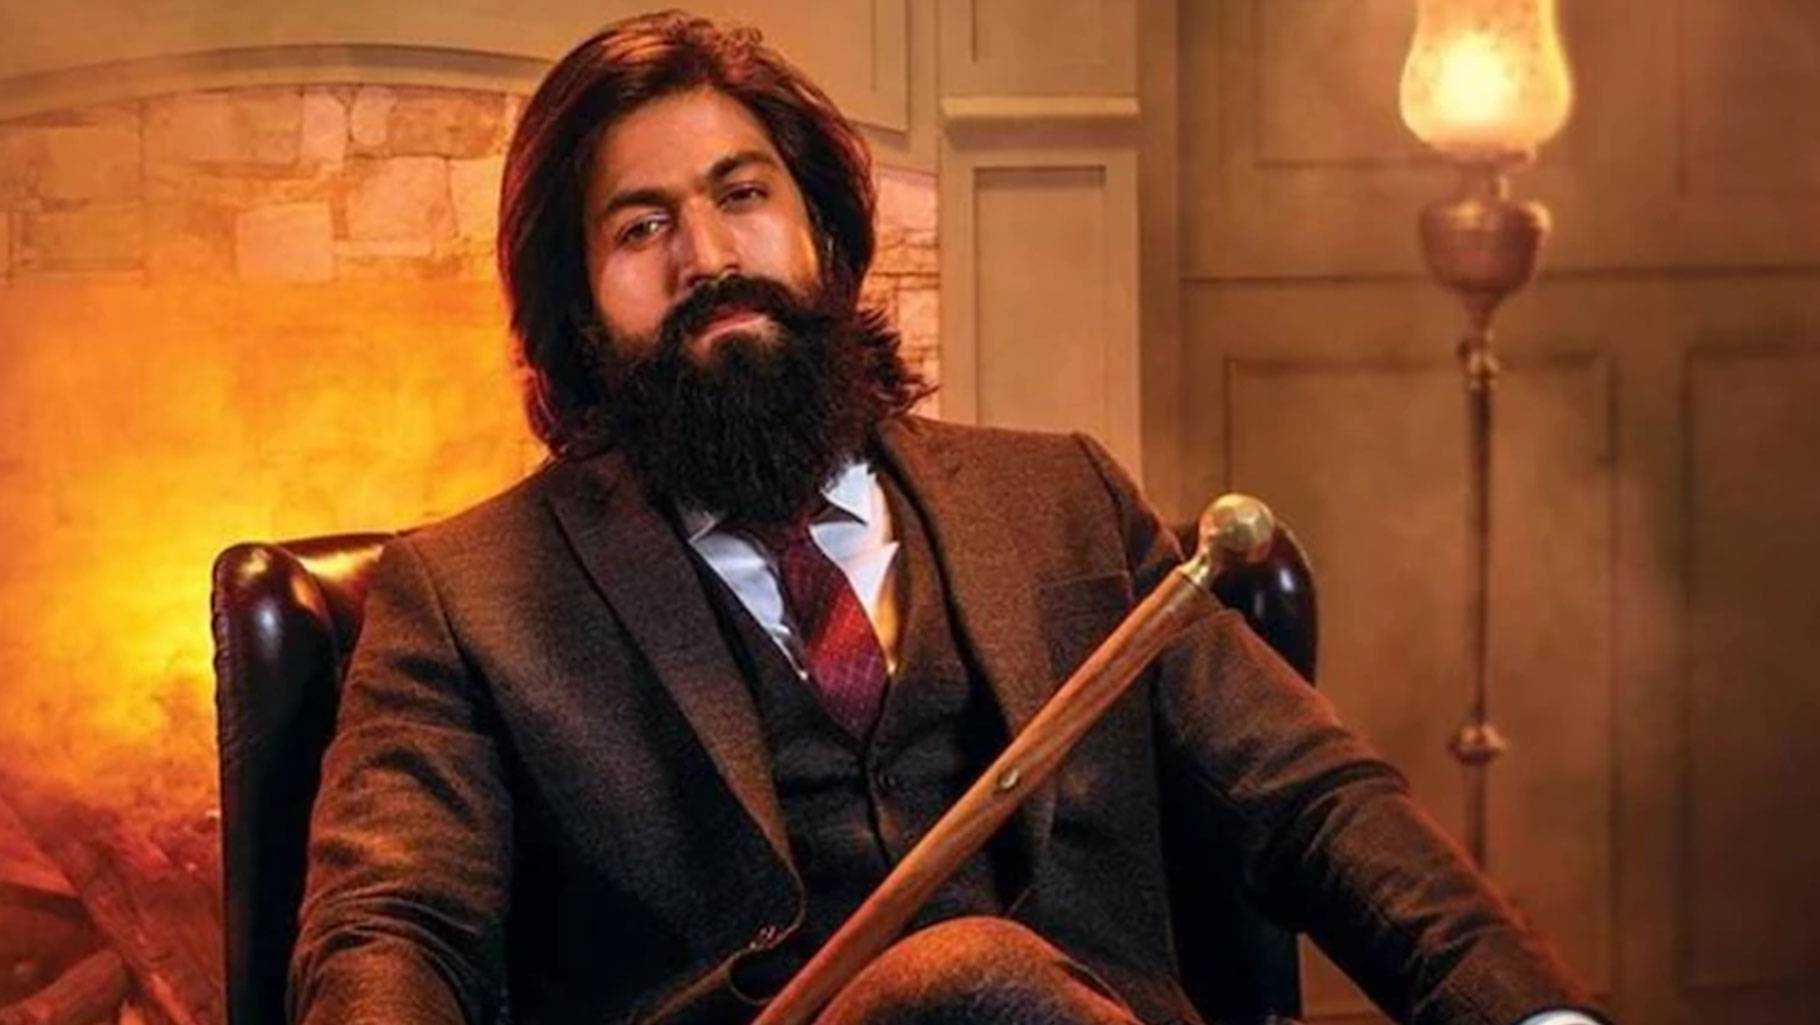 'People will know it' KGF star Yash reveals why he kept a low profile as he gets candid about his fame and success